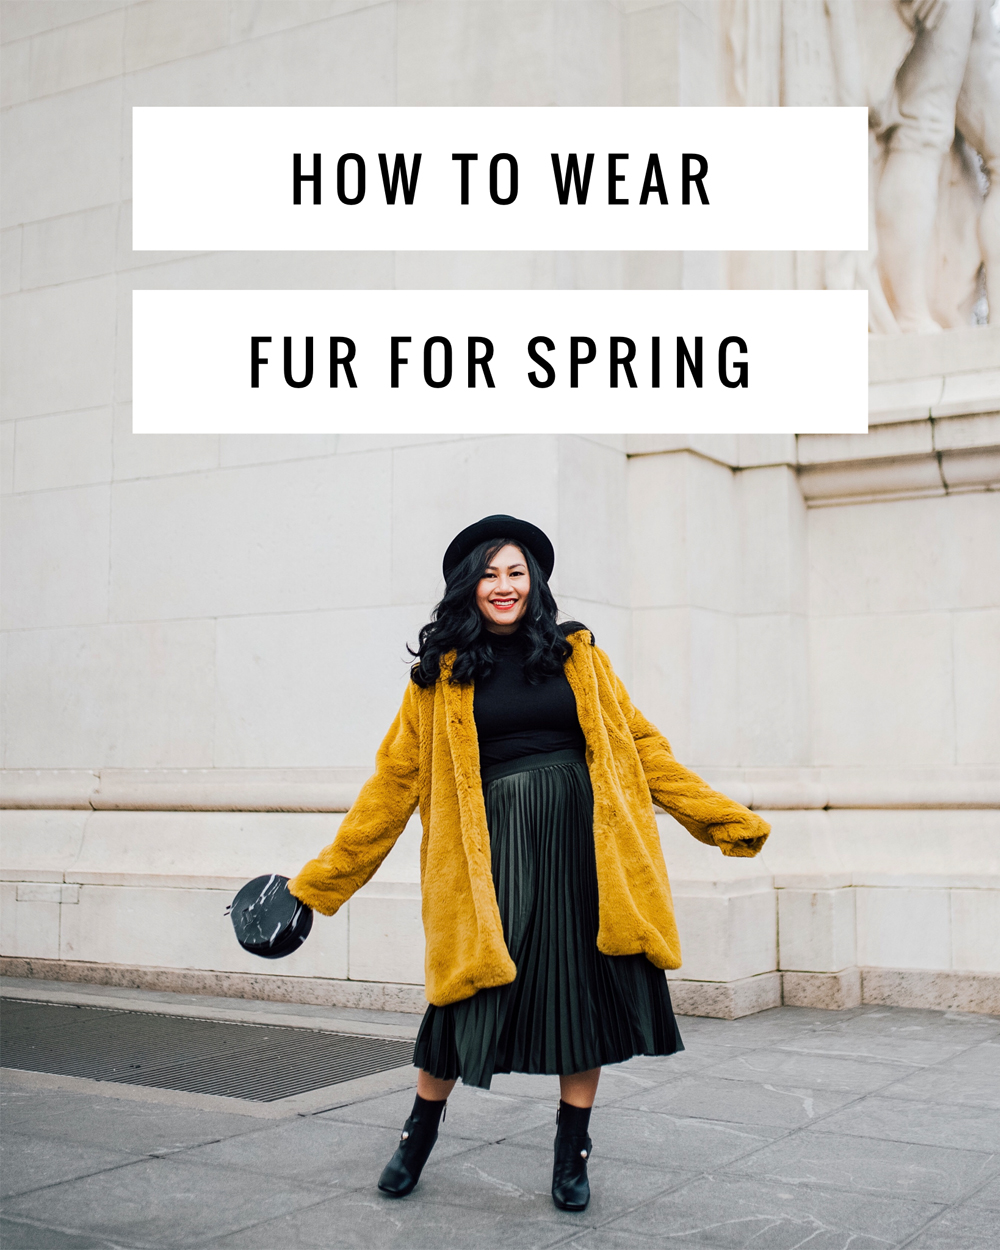 How To Wear Fur for Spring | Mimi & Chichi BlogMimi & Chichi Blog